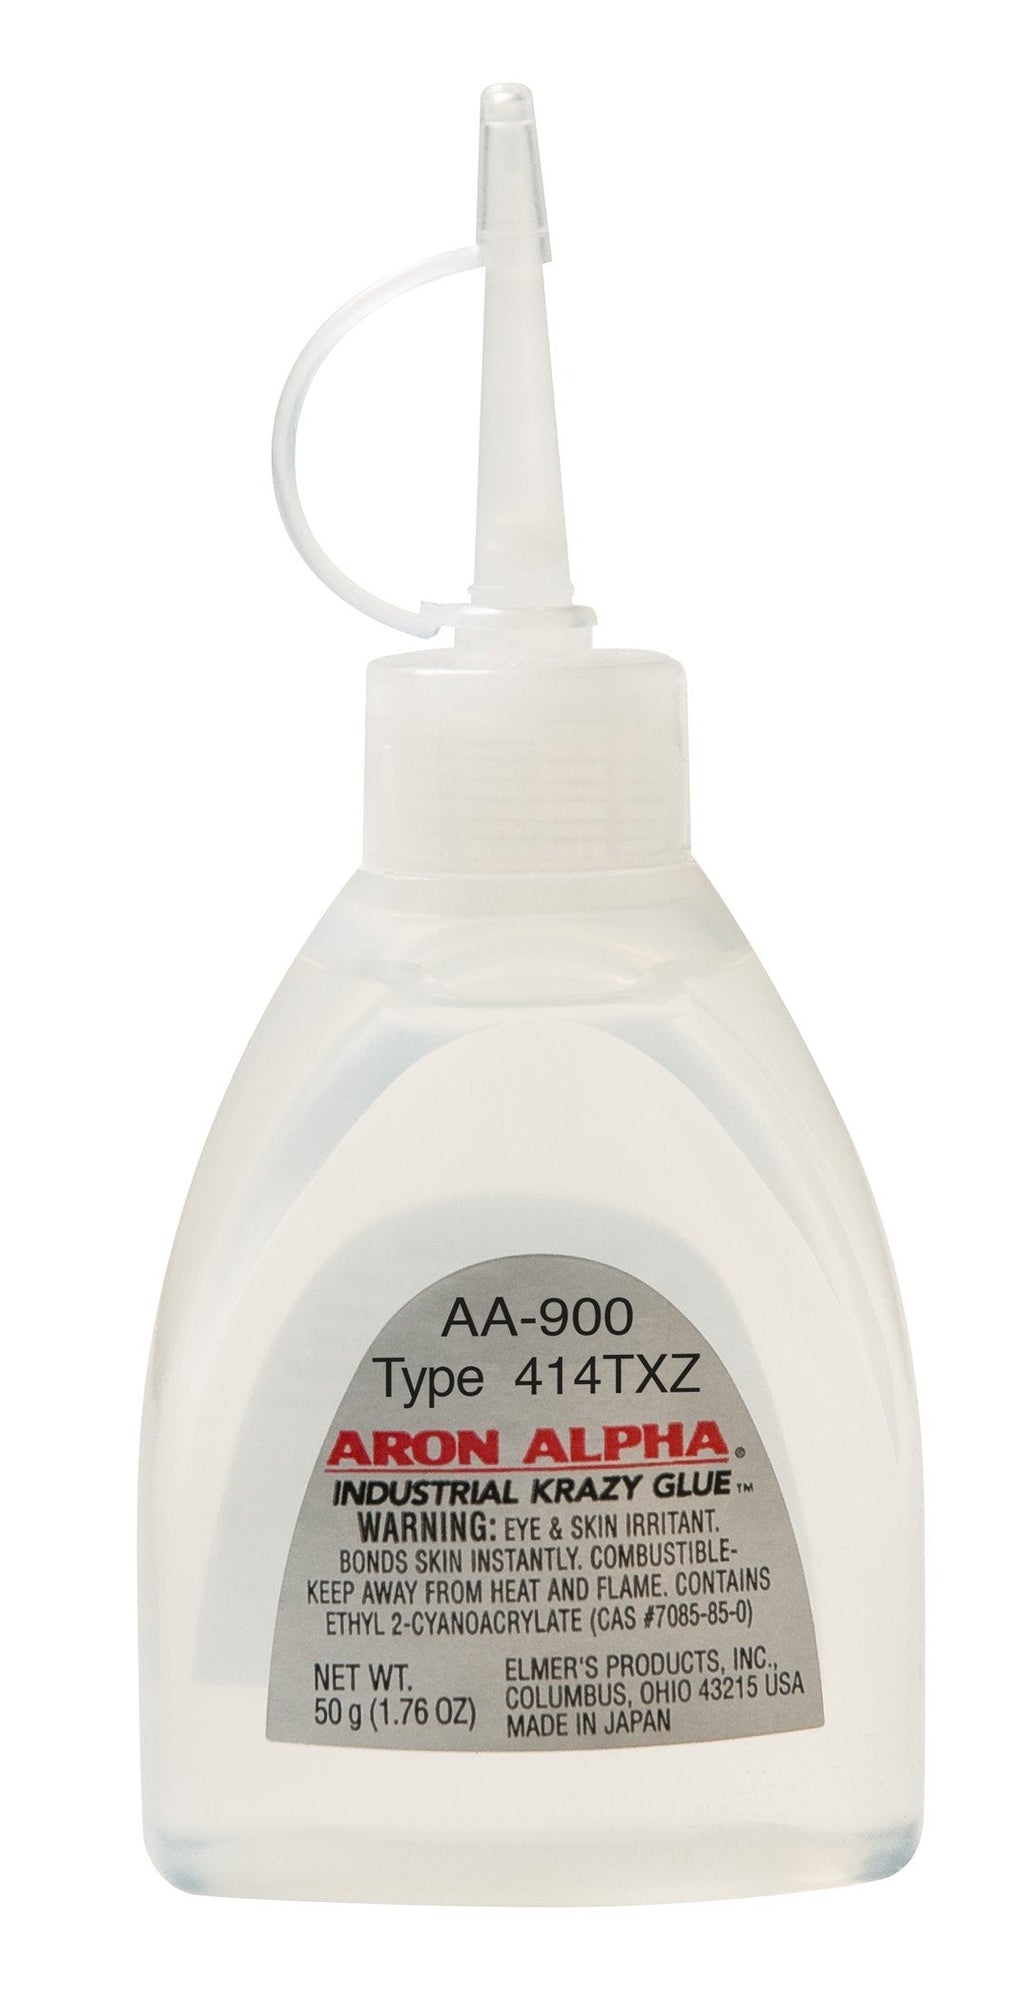  [AUSTRALIA] - Aron Alpha Industrial Krazy Glue-AA900 Aron Alpha 414TXZ (6,000 cps) High Heat (250 F) and Impact Resistant Instant Adhesive 50 g (1.76 oz) Bottle,clear